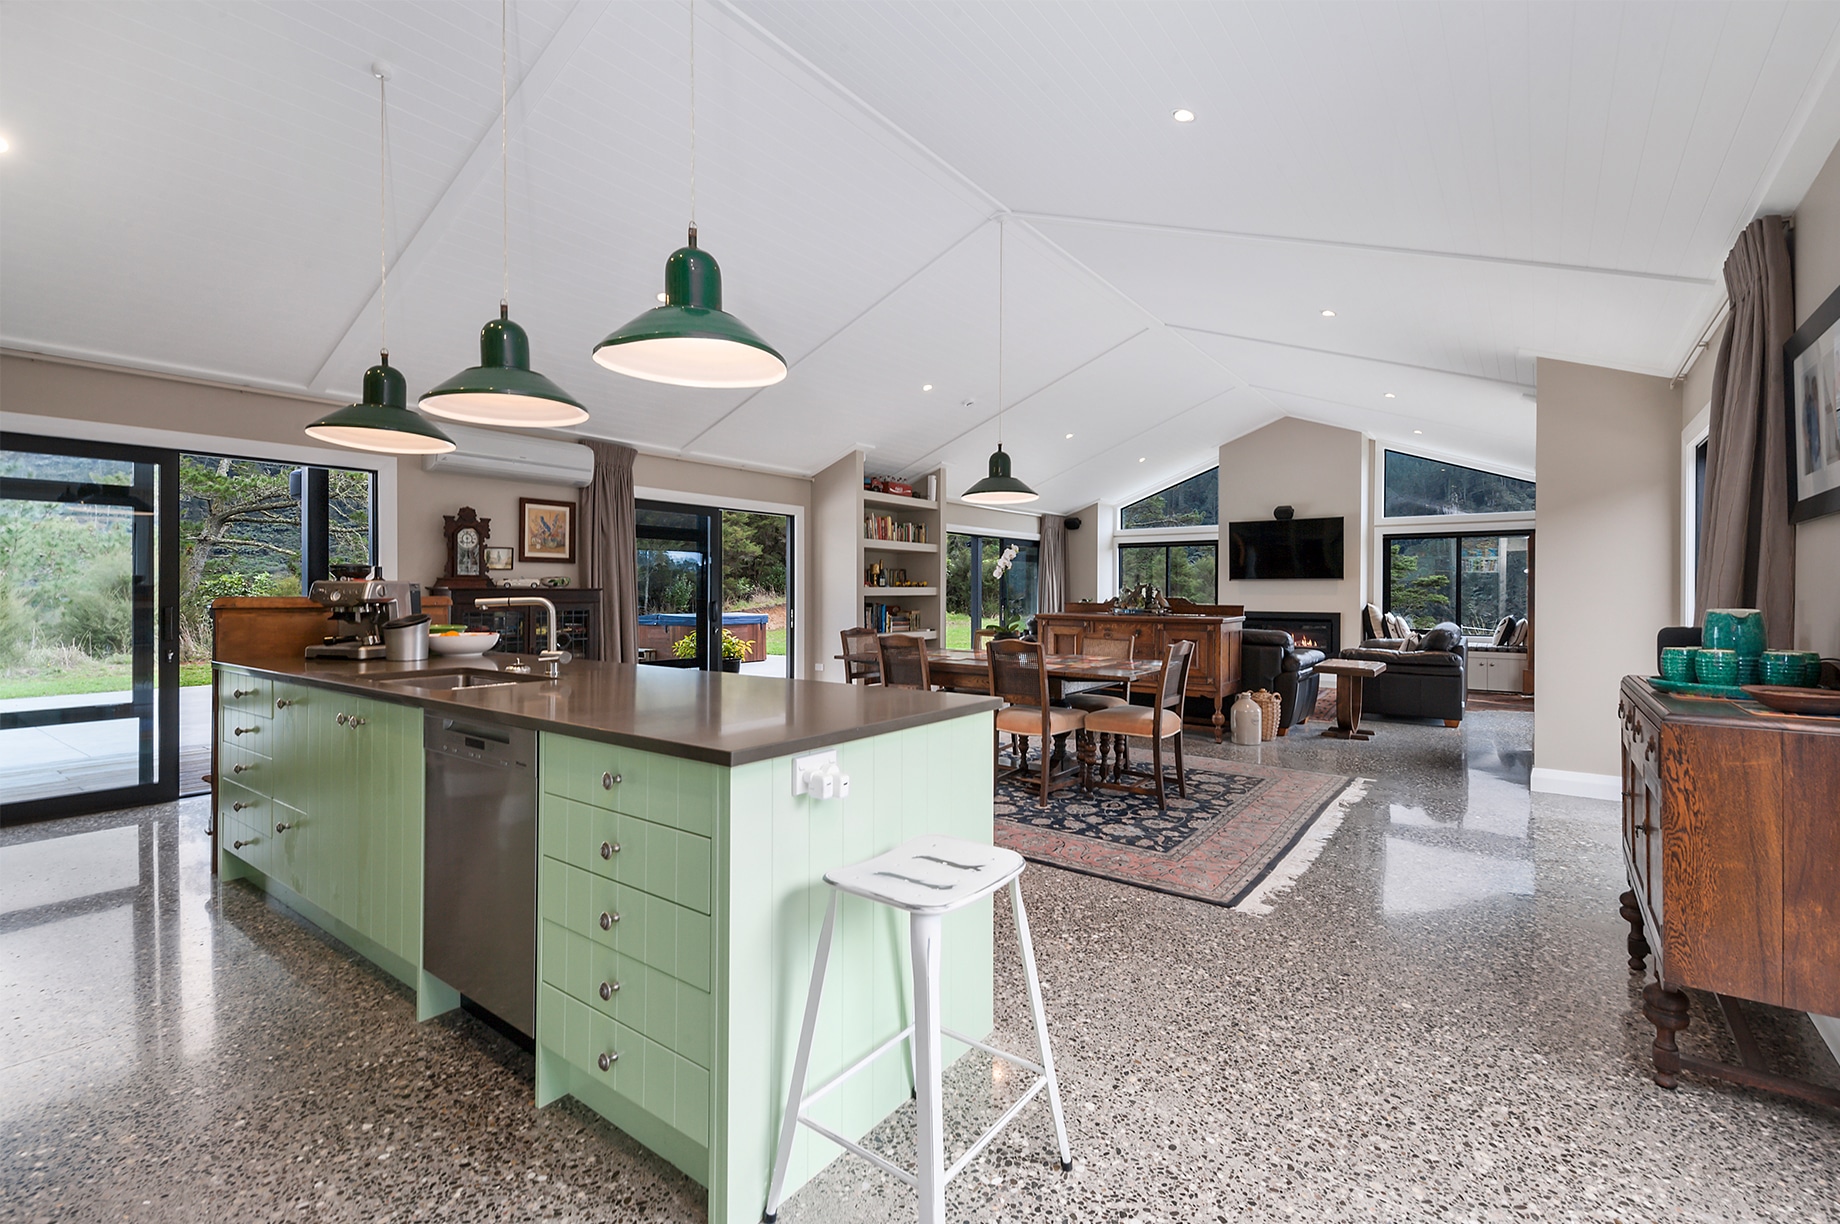 Large living area of a home with a mint kitchen island